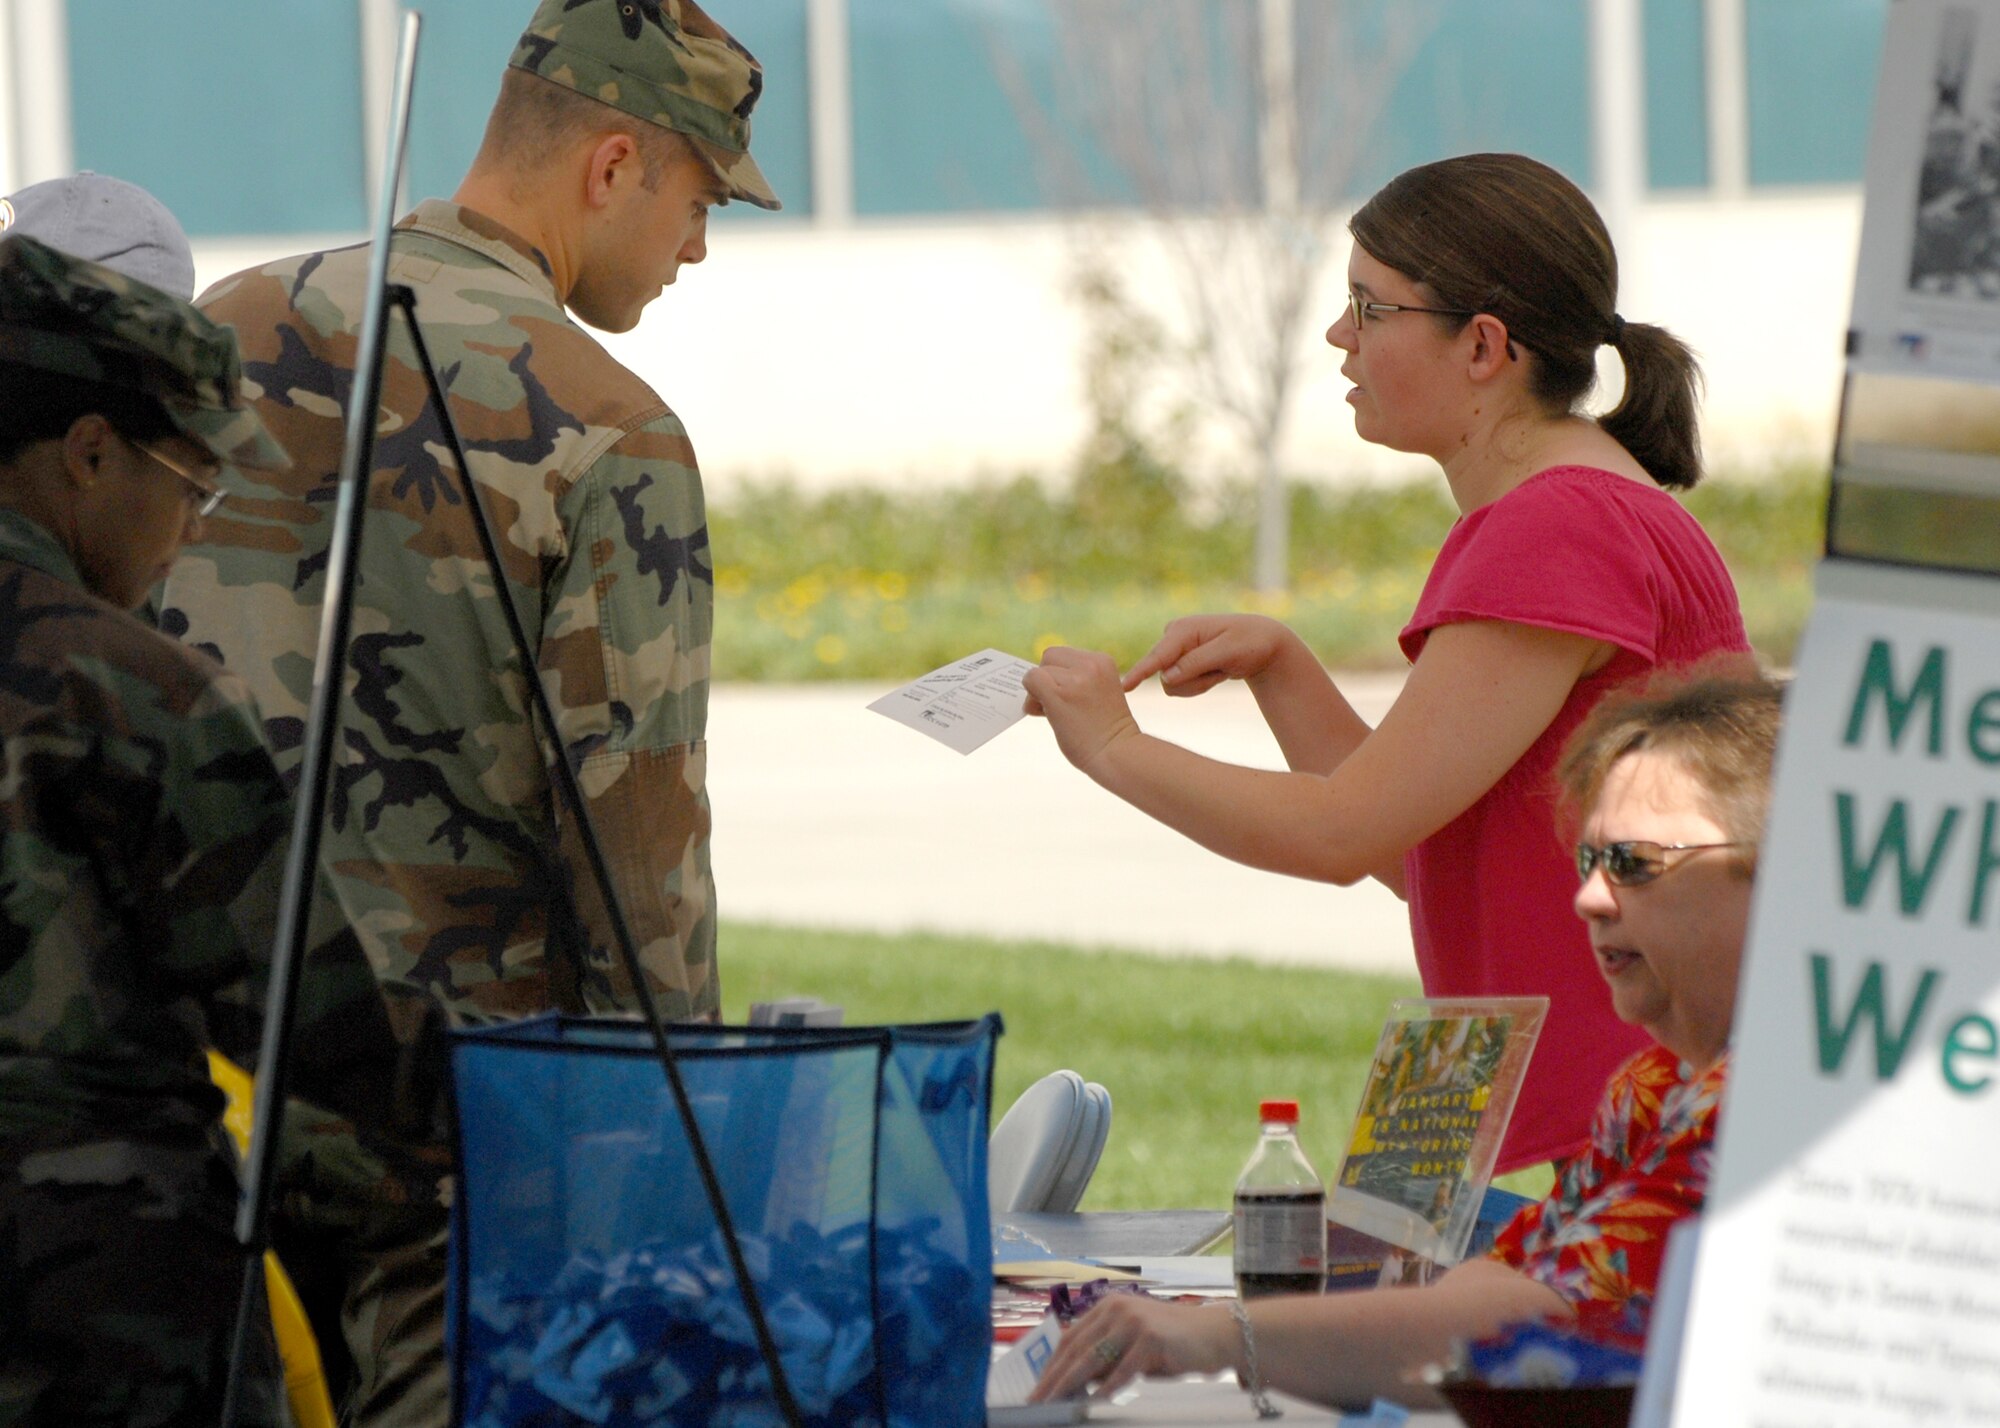 A Los Angeles Air Force Base military member receives information at one of the many Combined Federal Campaign organization booths during the 2008 CFC kickoff in the Schriever Space Complex courtyard, Oct 15. Charitable organizations such as the American Heart Association, American Cancer Association, USO, Big Brothers/Big Sisters, Salvation Army, AIDS ReSearch Alliance, Meals on Wheels West, City of Hope, Mission to Children, the United Way, and others passed out information to attendees.  (Photo by Stephen Schester)